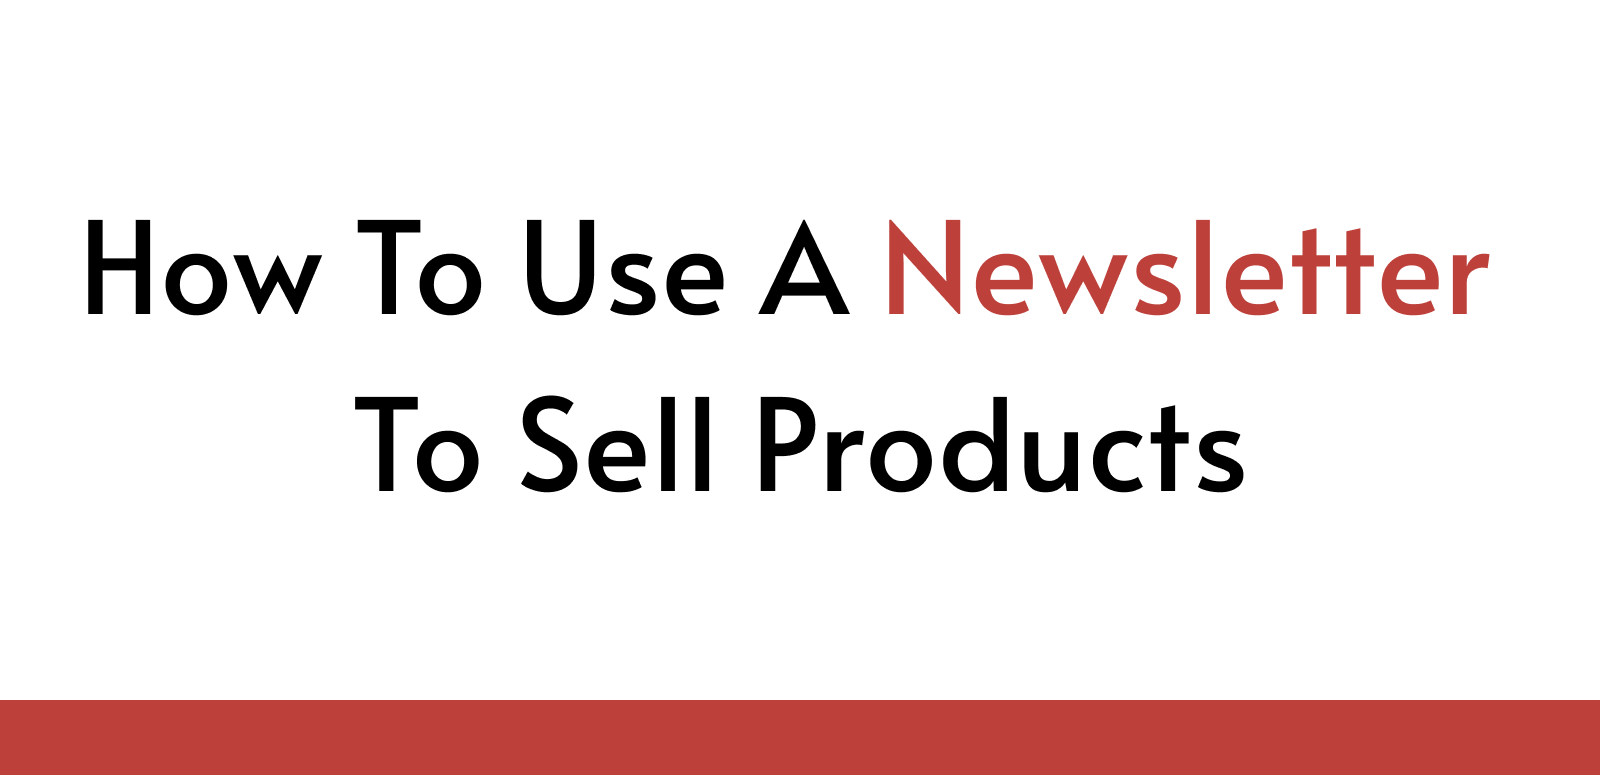 How To Use A Newsletter To Sell Products